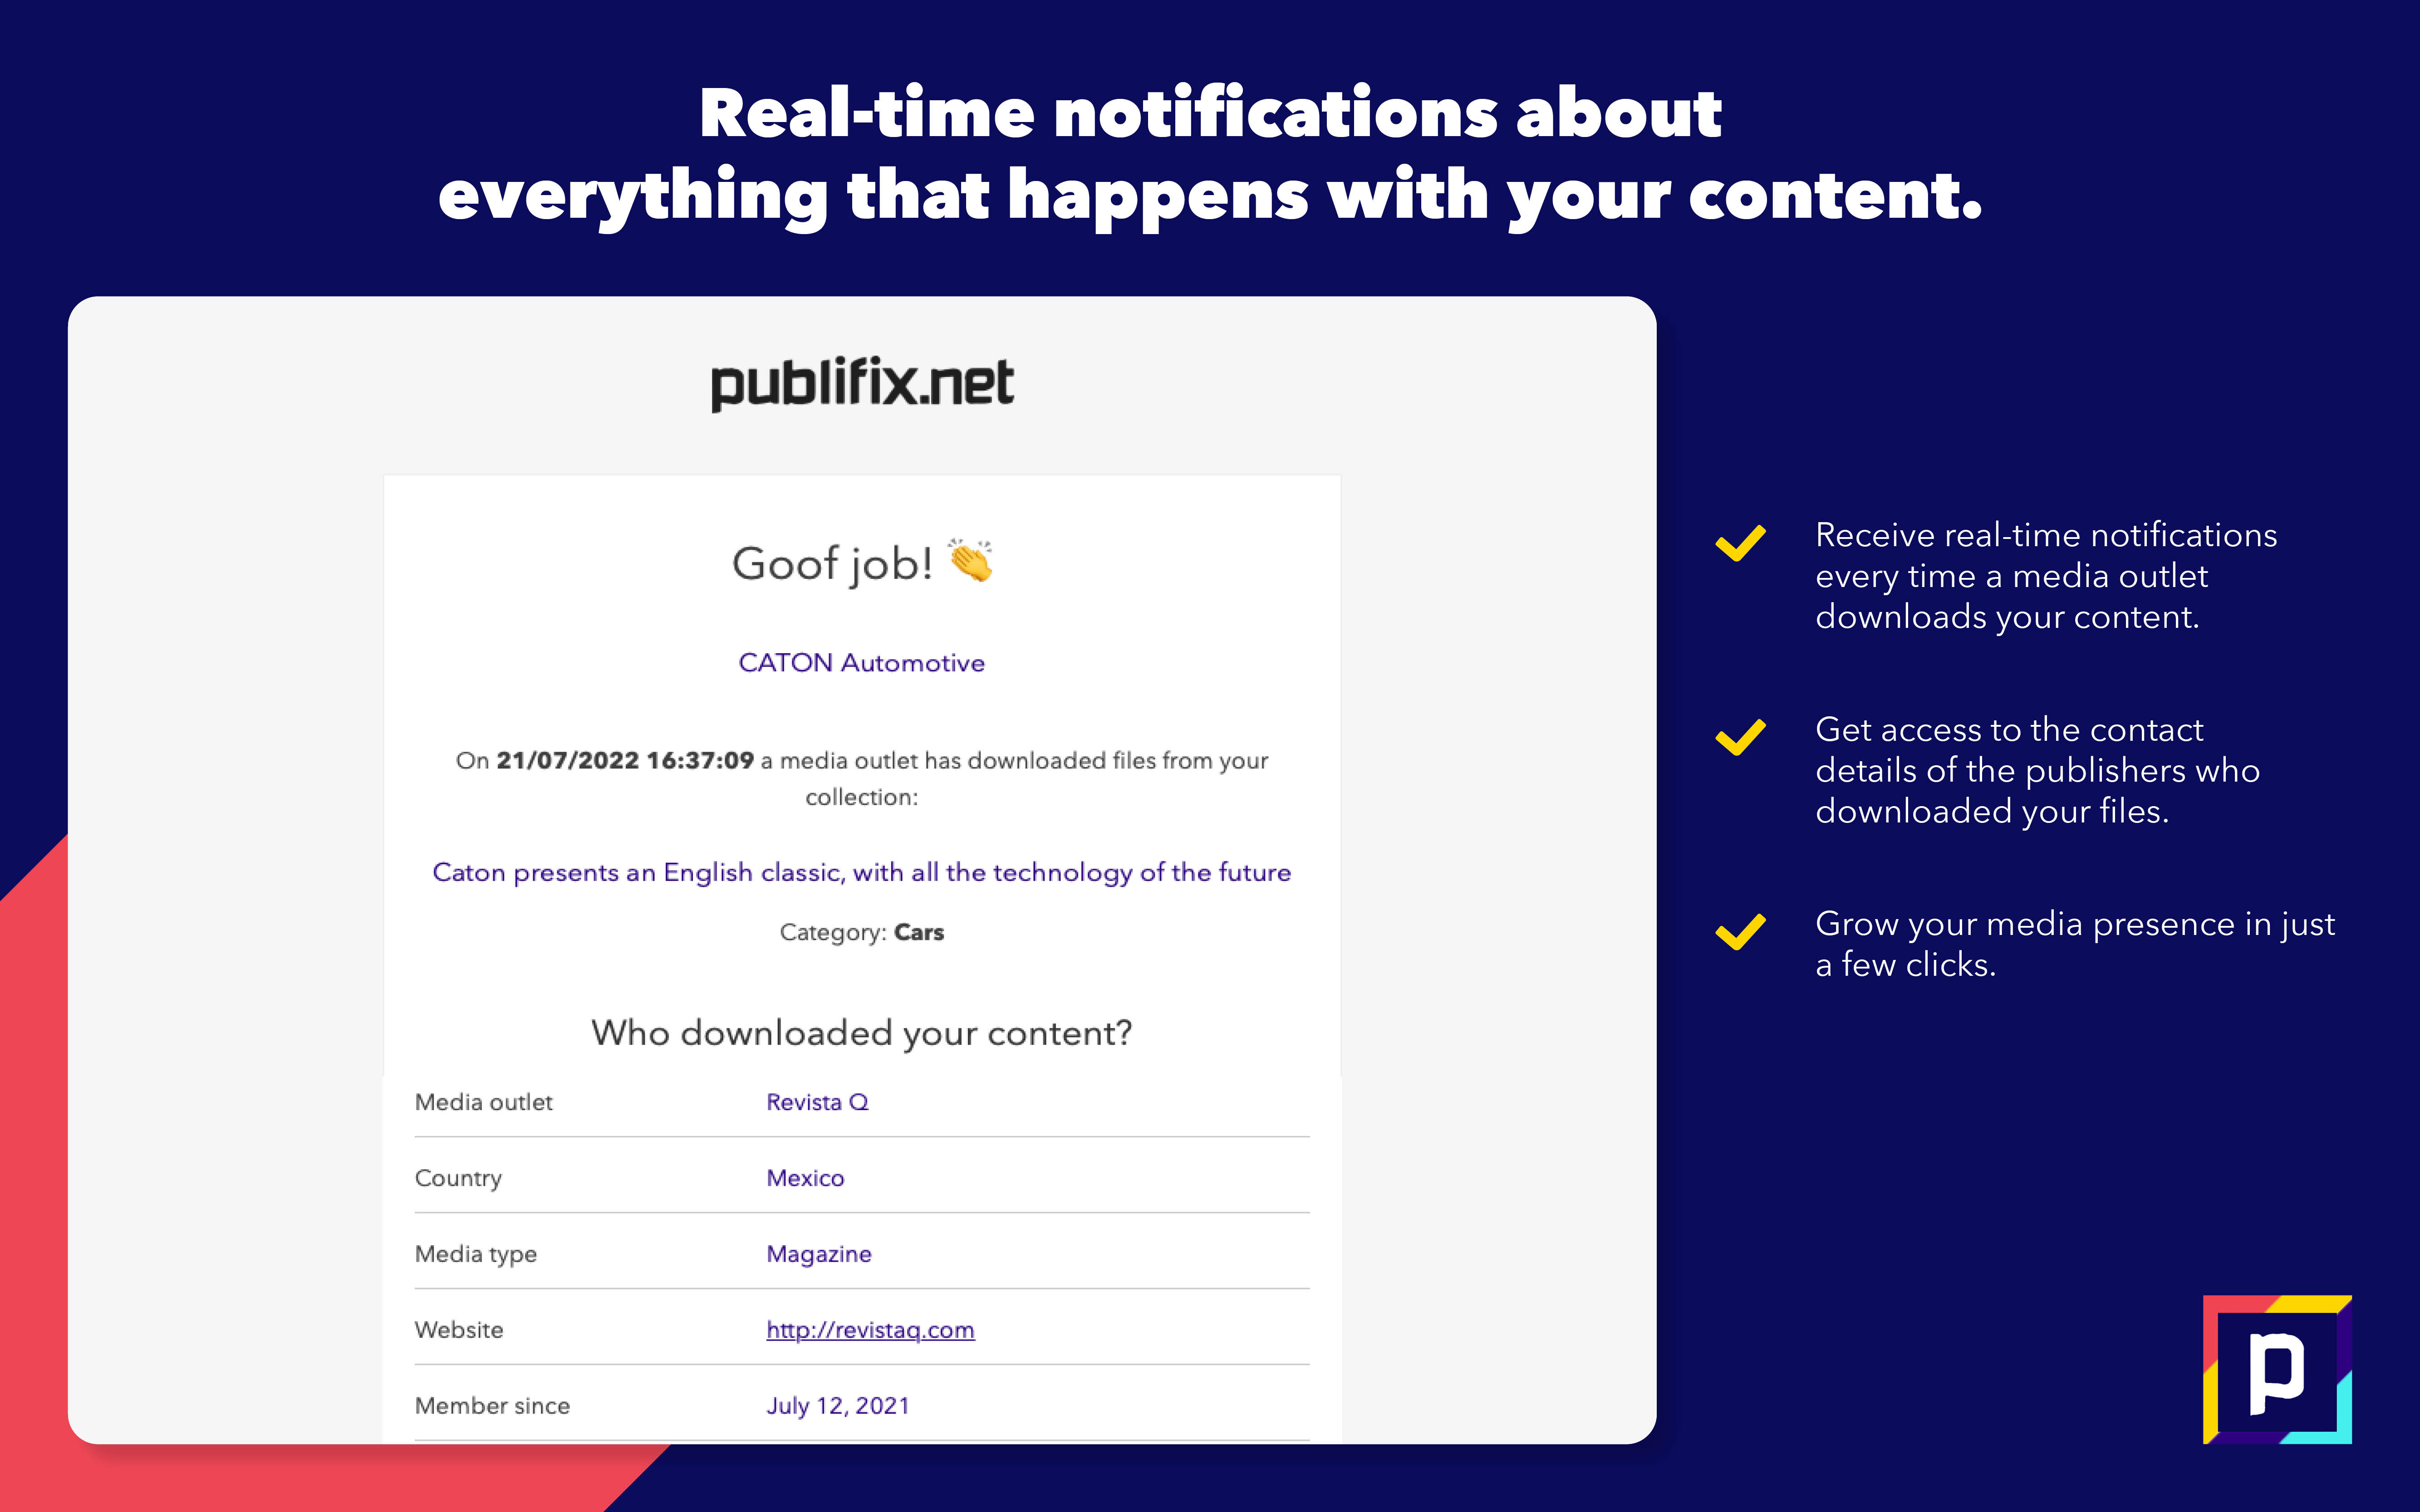 Receive real-time notifications every time a media outlet downloads your content